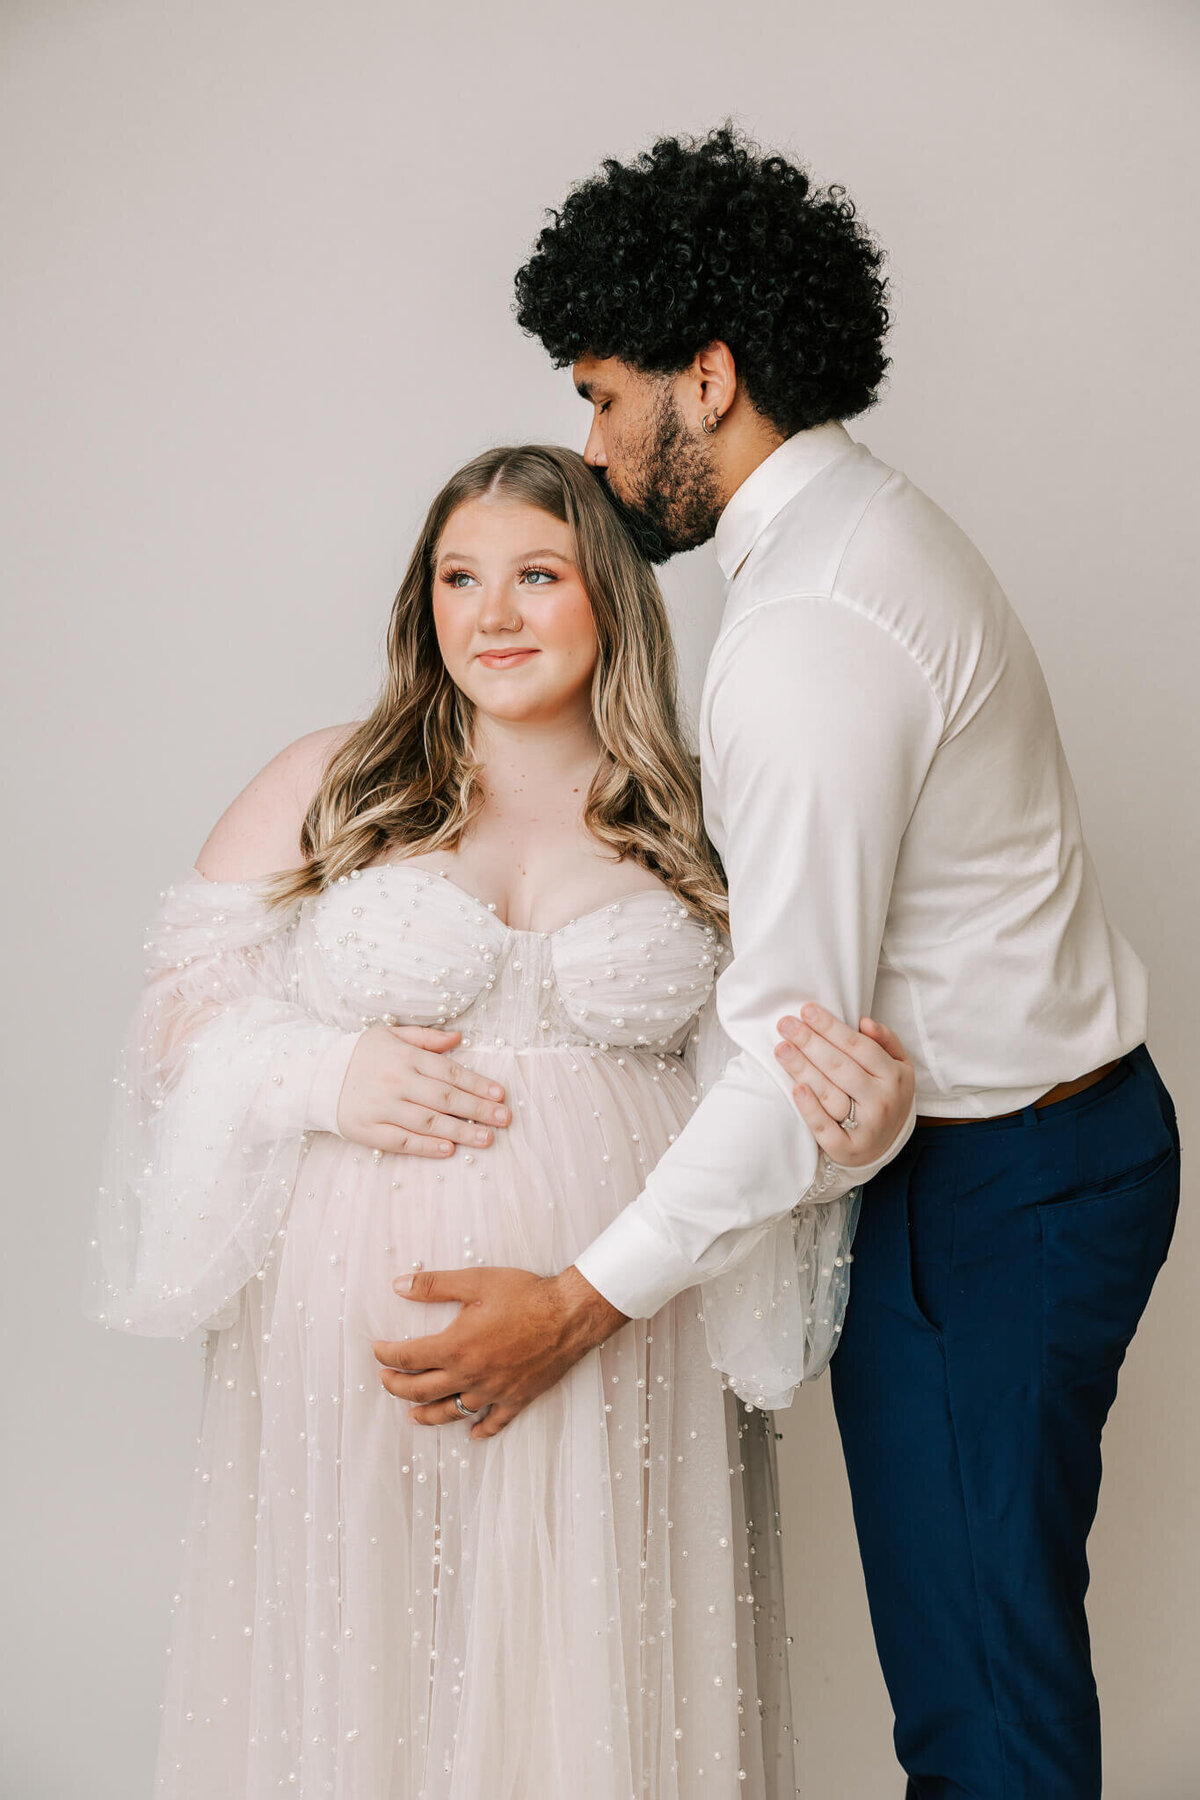 pregnant mom wearing white dress being kissed on the head by her husband